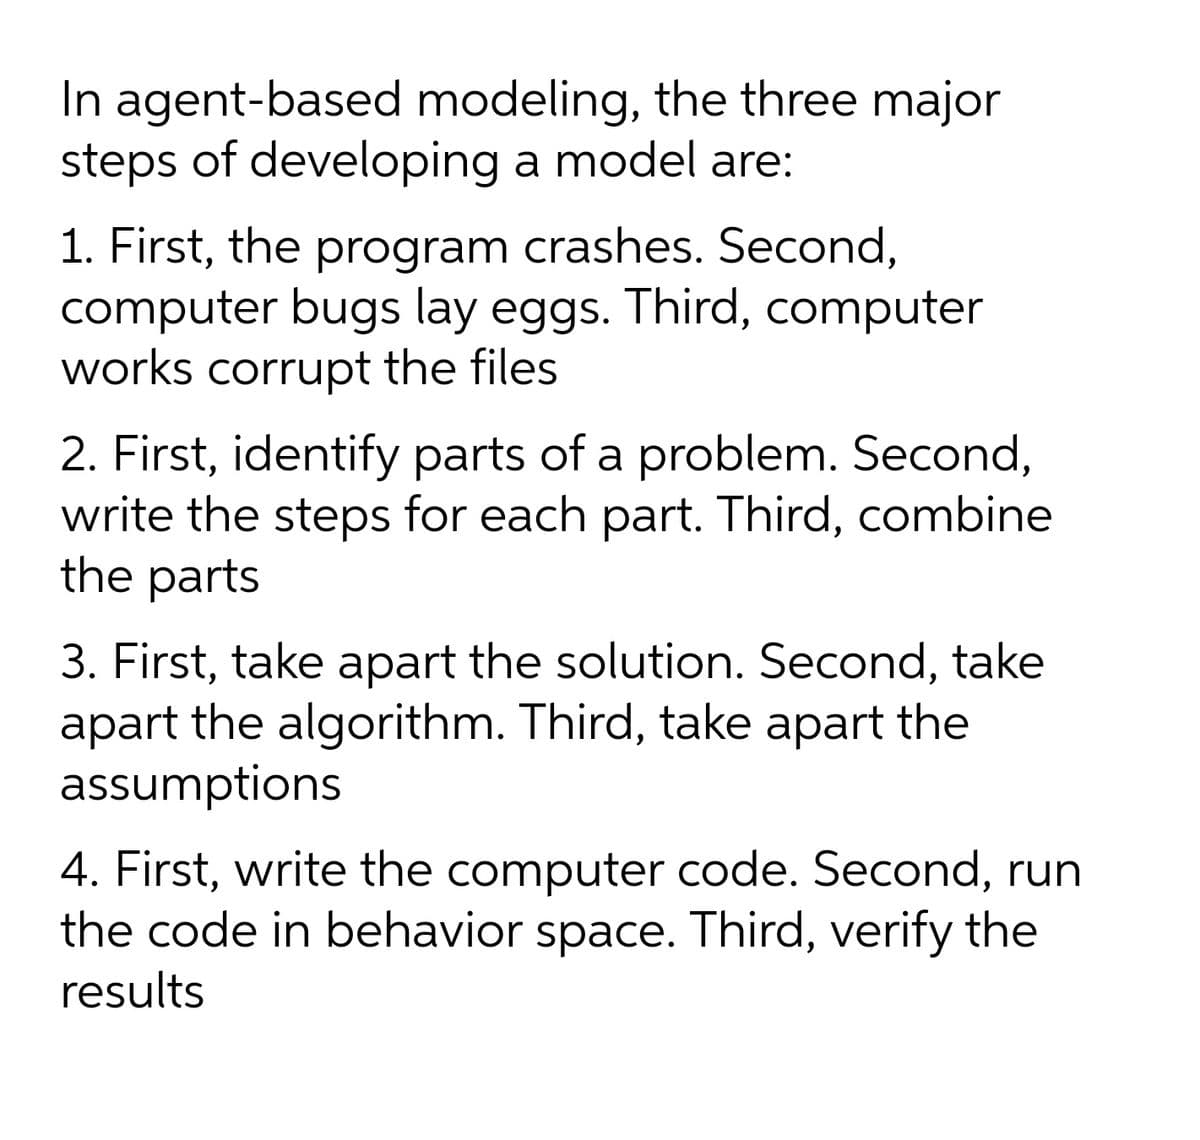 In agent-based modeling, the three major
steps of developing a model are:
1. First, the program crashes. Second,
computer bugs lay eggs. Third, computer
works corrupt the files
2. First, identify parts of a problem. Second,
write the steps for each part. Third, combine
the parts
3. First, take apart the solution. Second, take
apart the algorithm. Third, take apart the
assumptions
4. First, write the computer code. Second, run
the code in behavior space. Third, verify the
results
